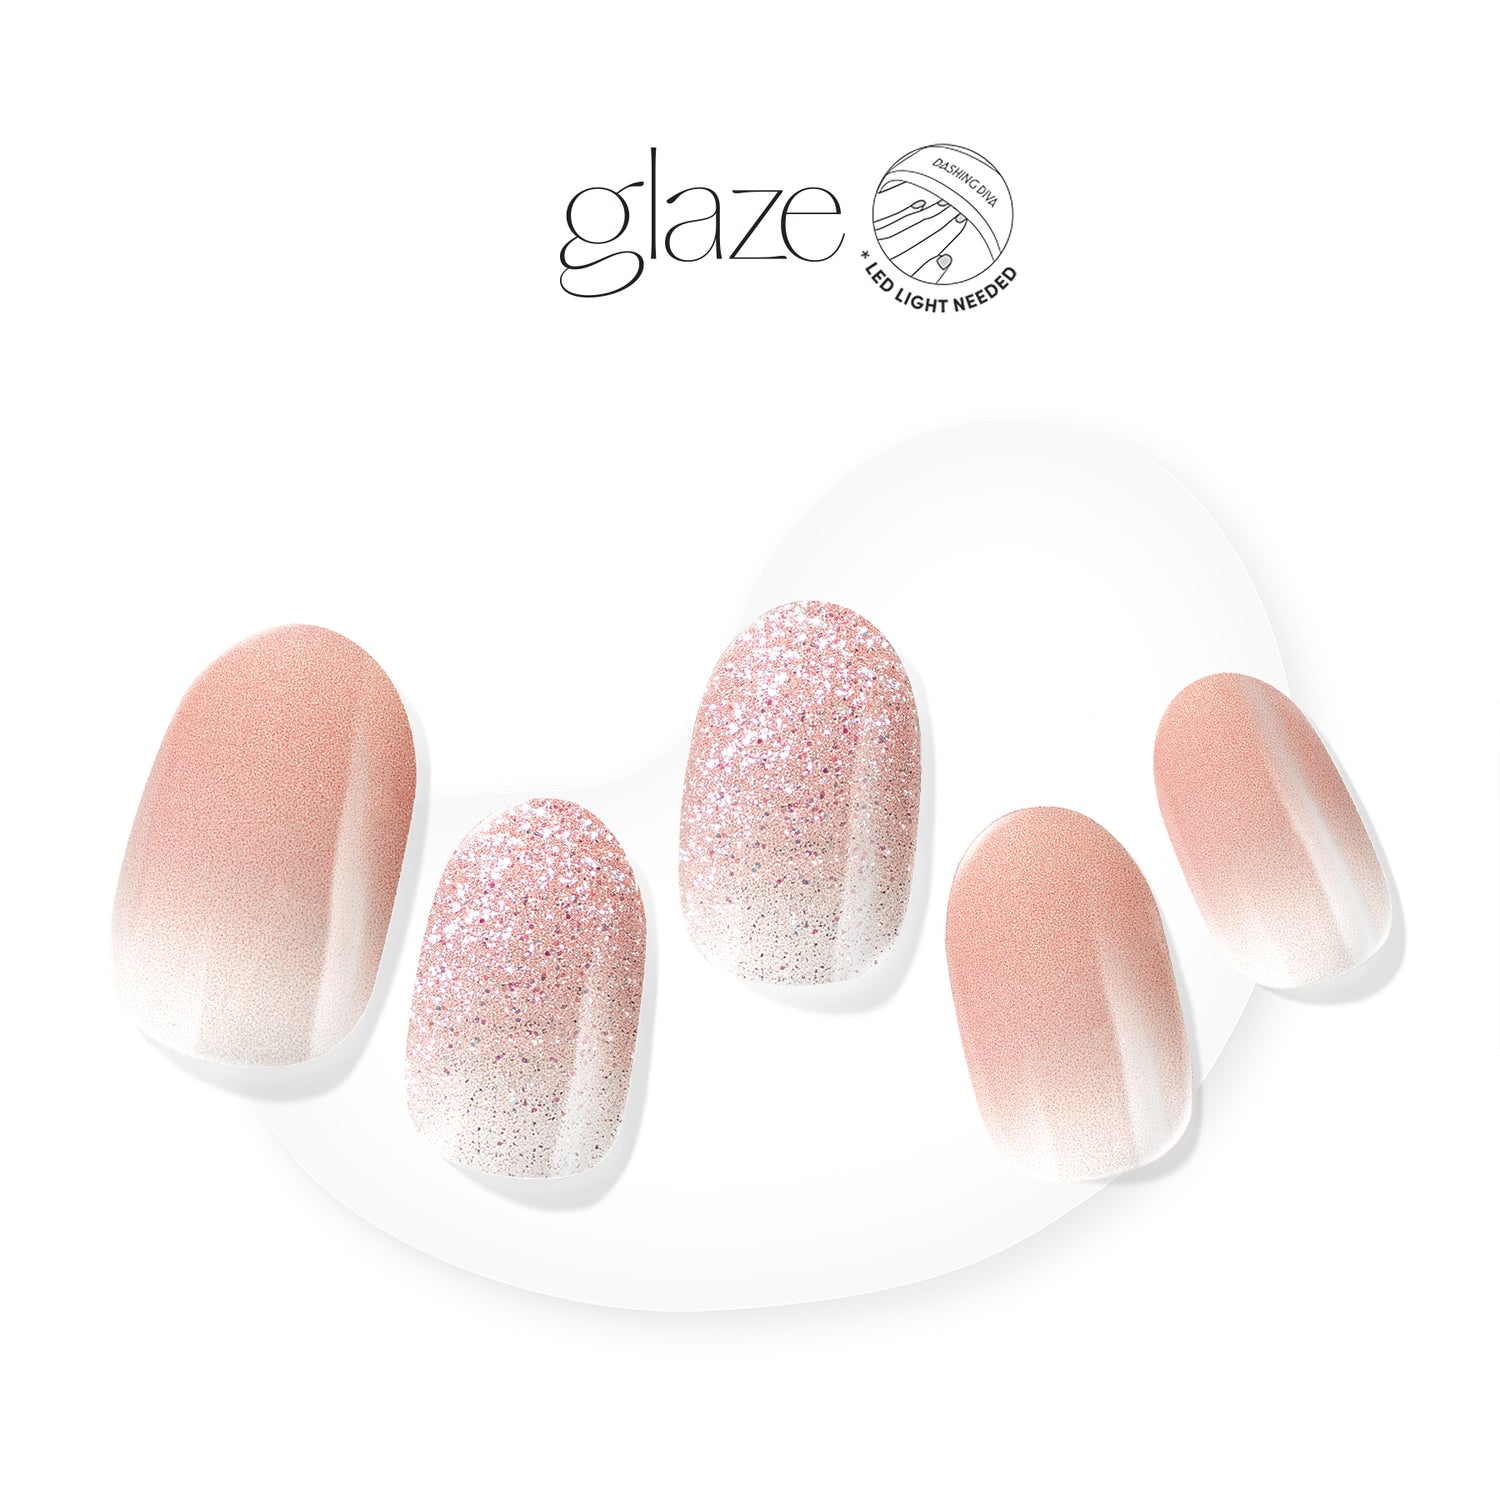 Semi-cured nude ombré gel nail strips featuring iridescent velvet glitter with mega volume and maximum shine.